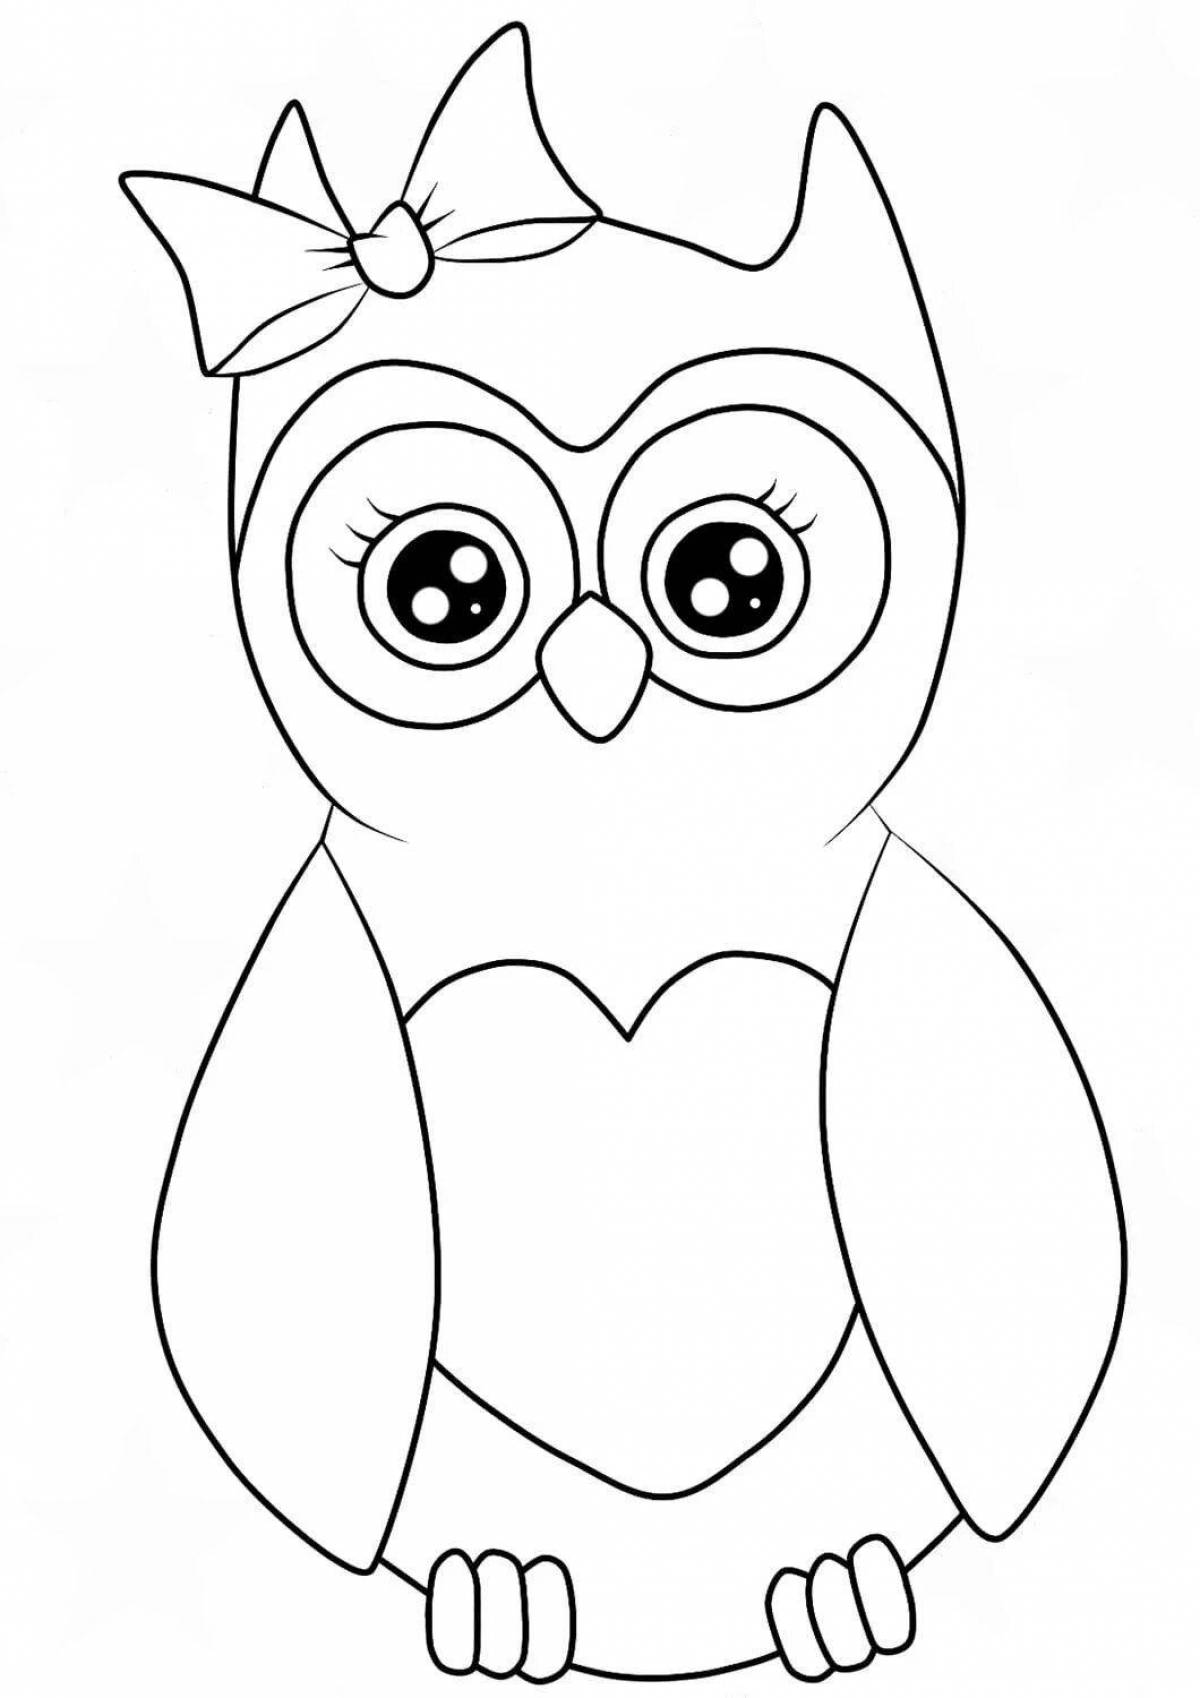 Bright how to draw coloring pages